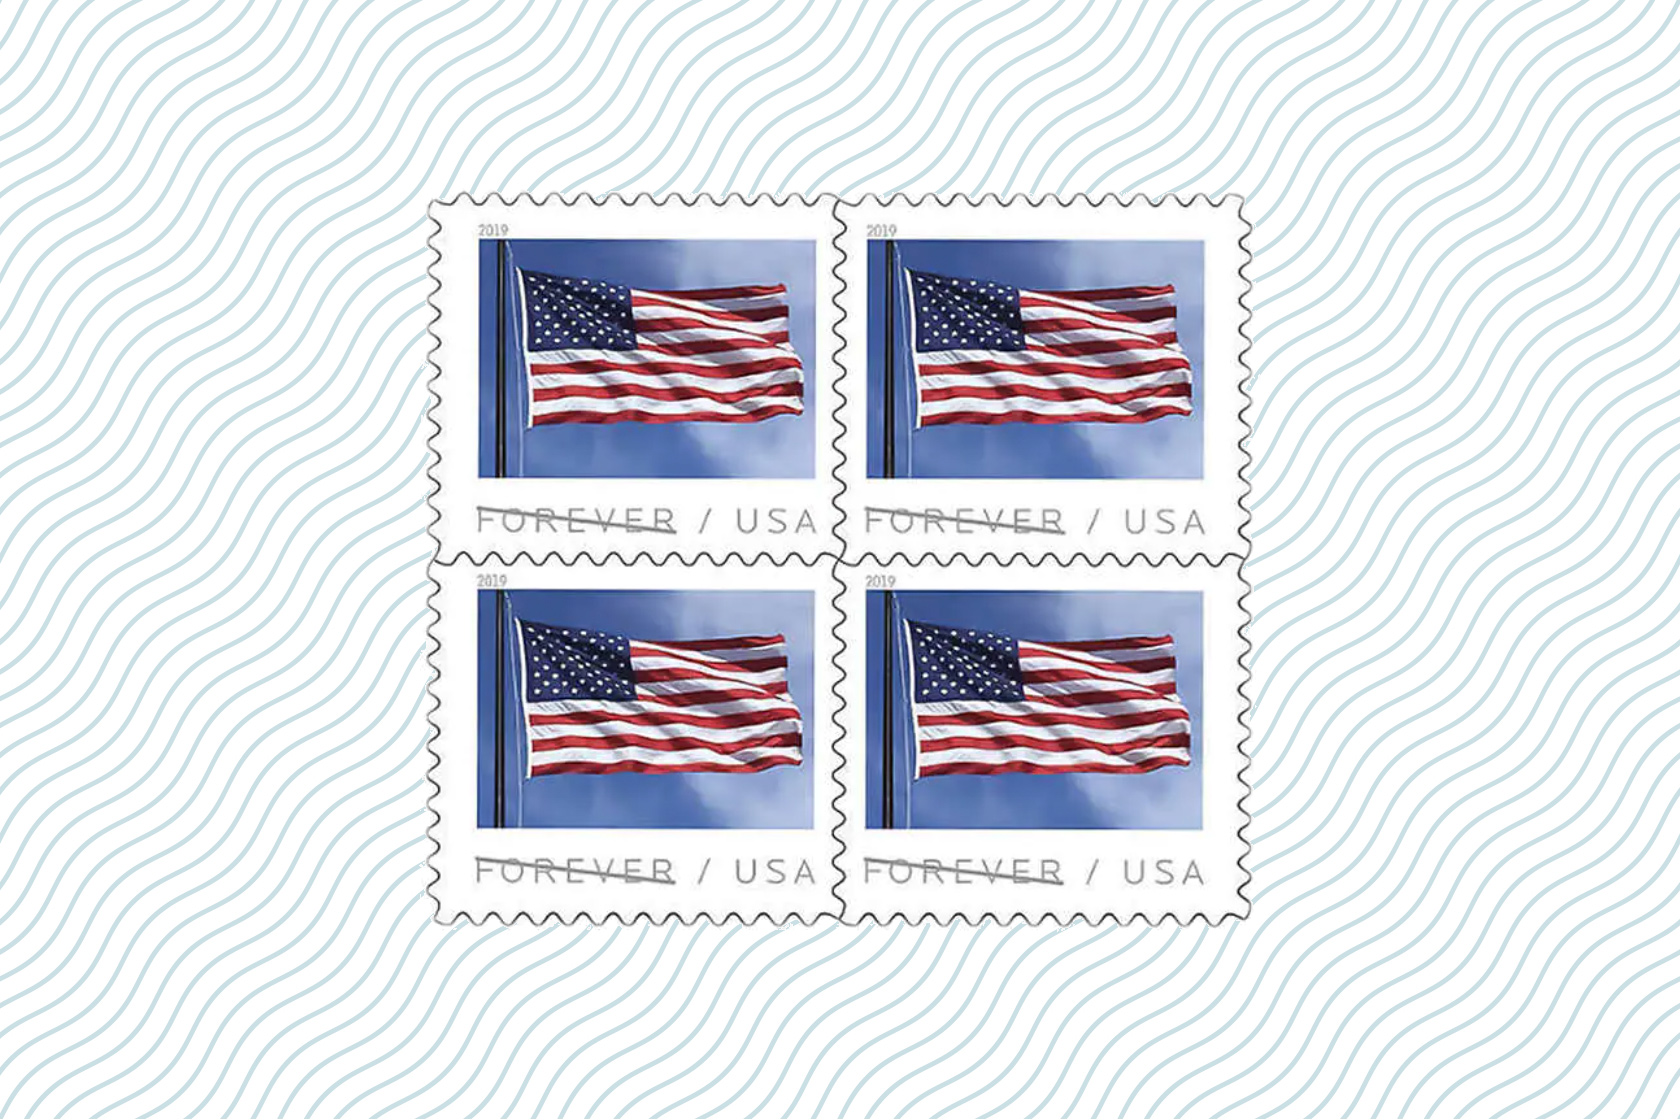 The USPS is set to increase the price of Forever Stamps